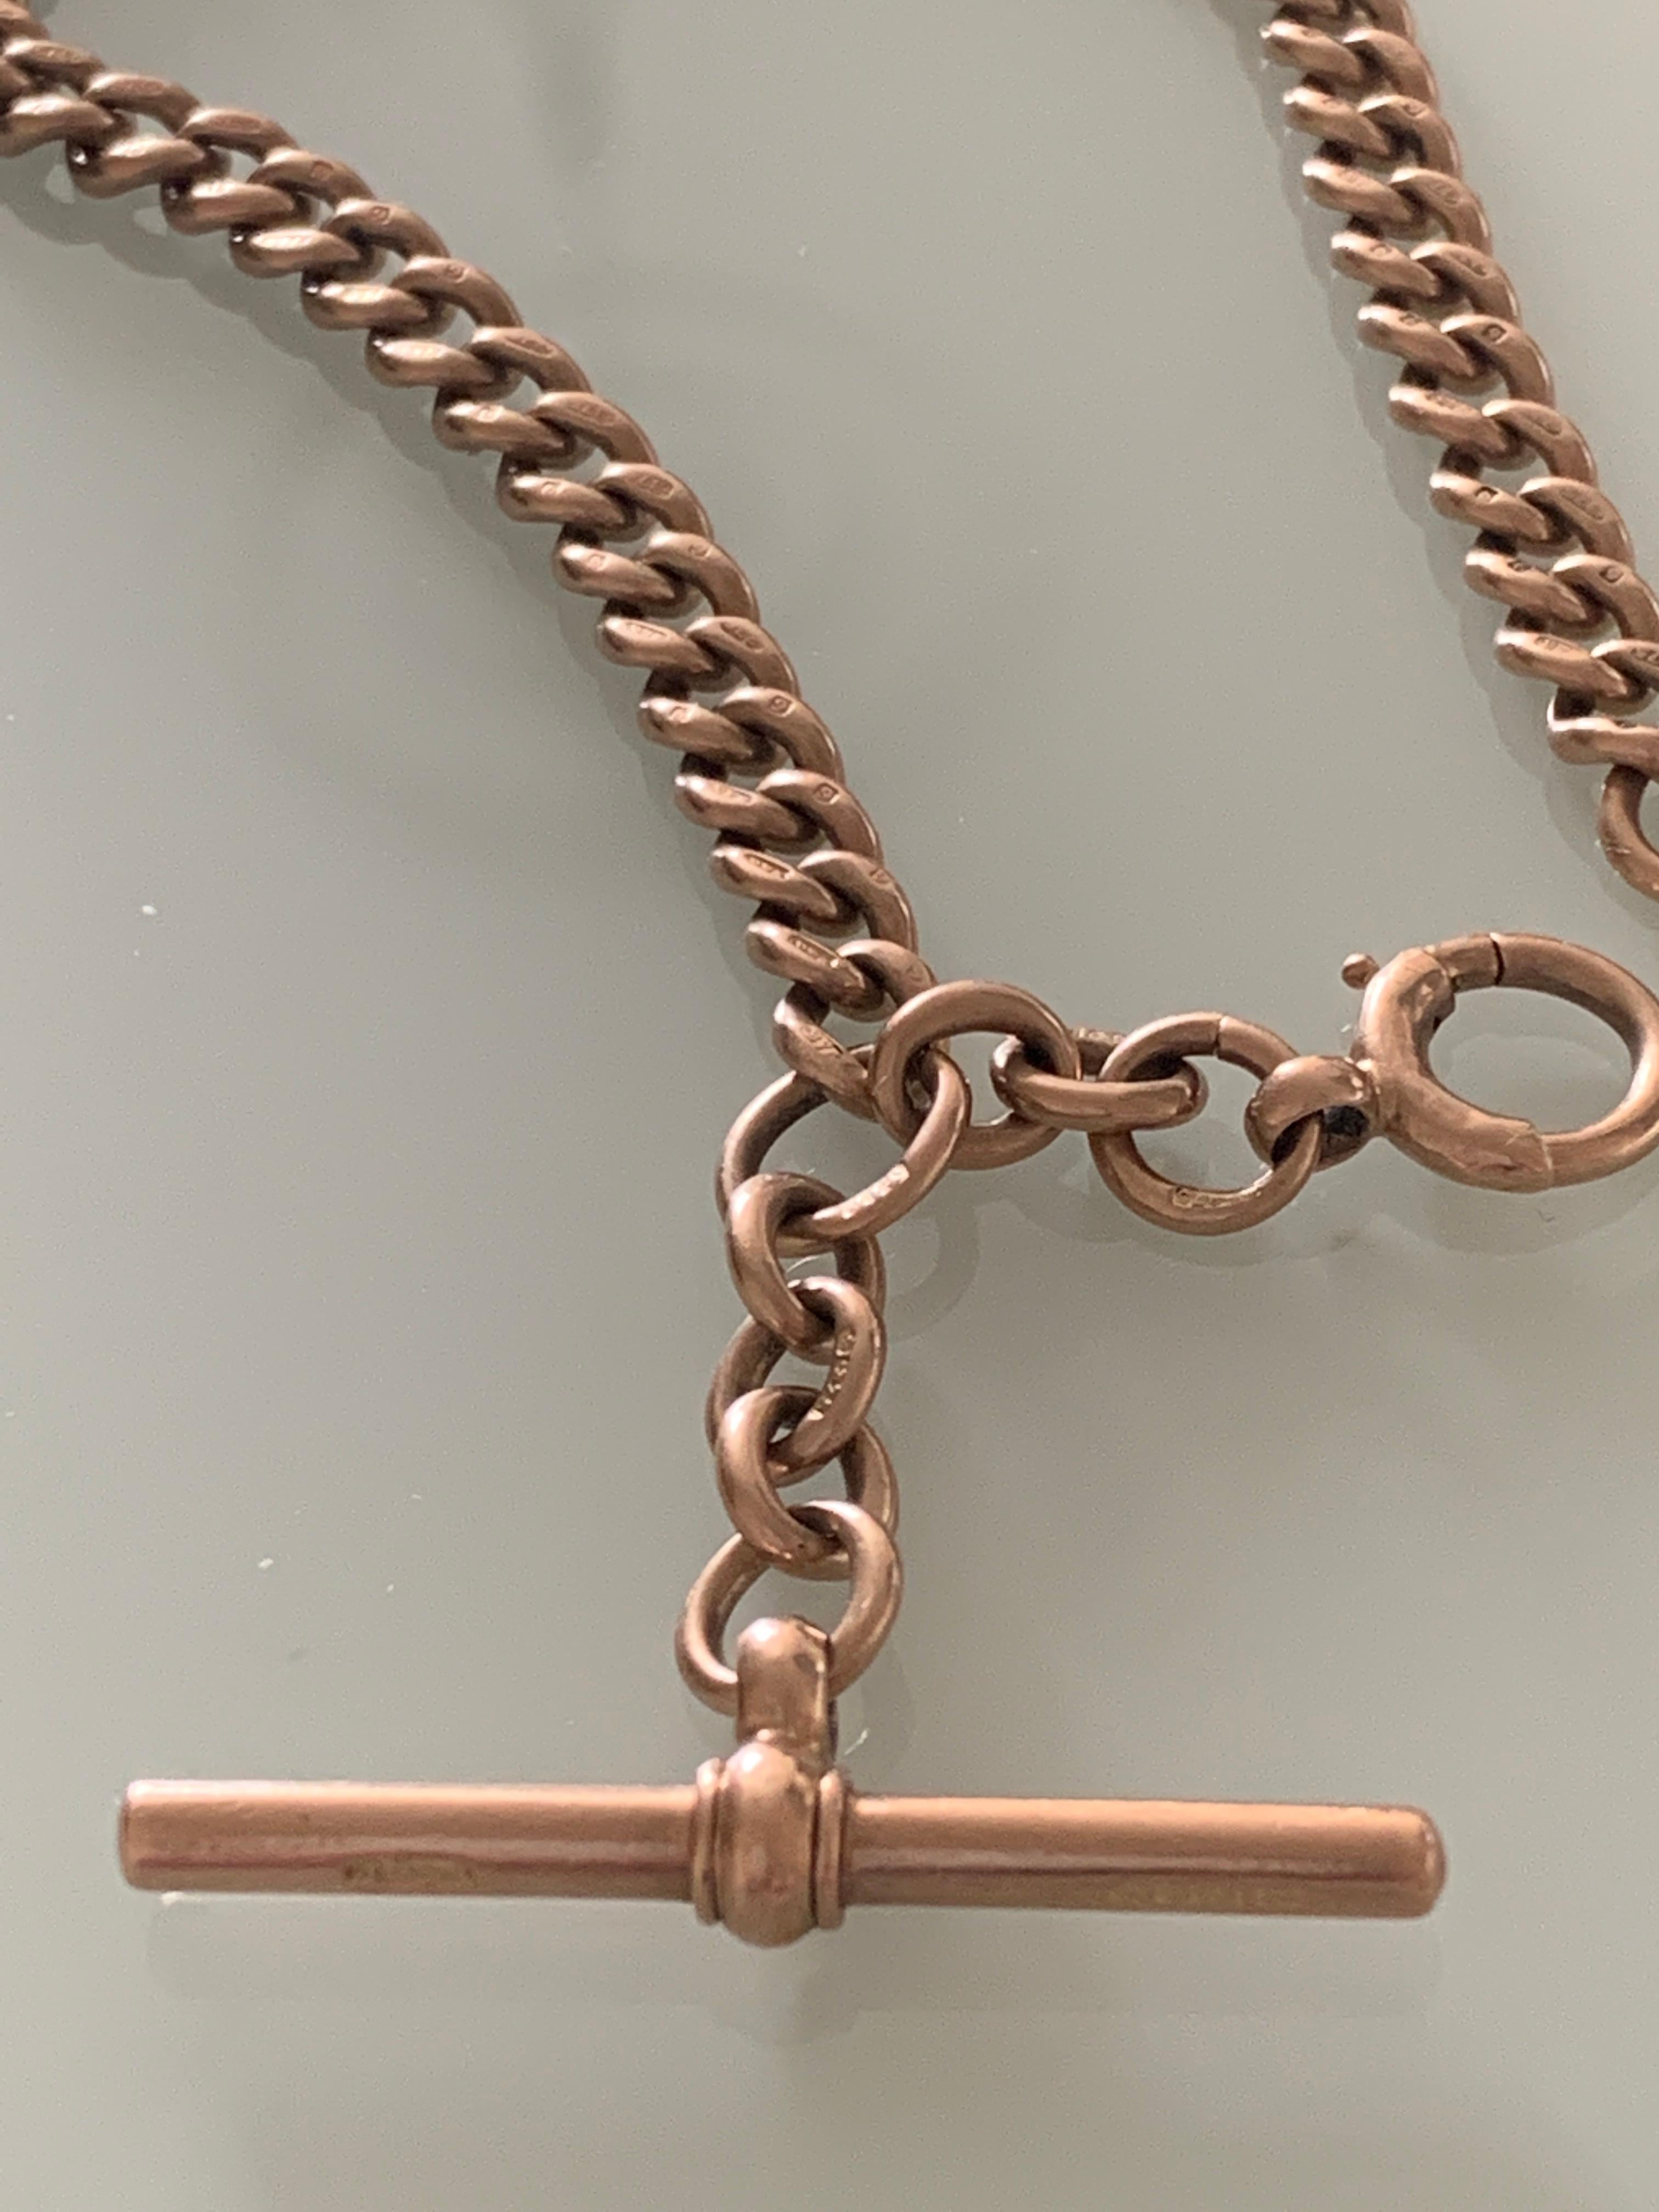 9ct Rose Gold Antique Gold Bracelet
Circa 1880s - 1900's
In beautiful condition
Every link is stamped 9 375
Full Hallmarked - Birmingham United Kingdom
By John Grinsell & Sons
Length 8 Inches 
Weight 23.66 grams


